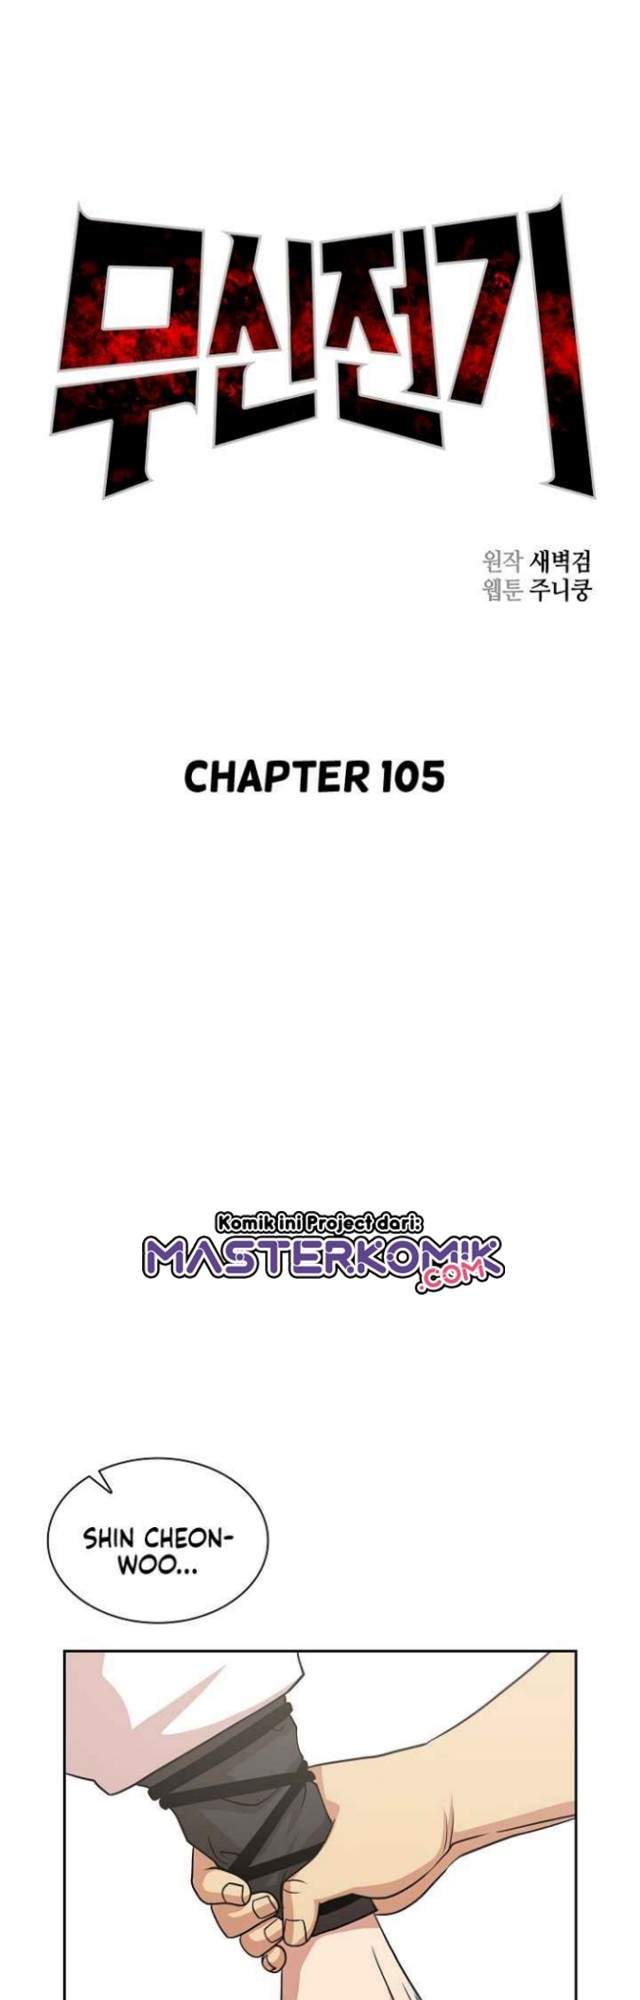 Record of the War God Chapter 105